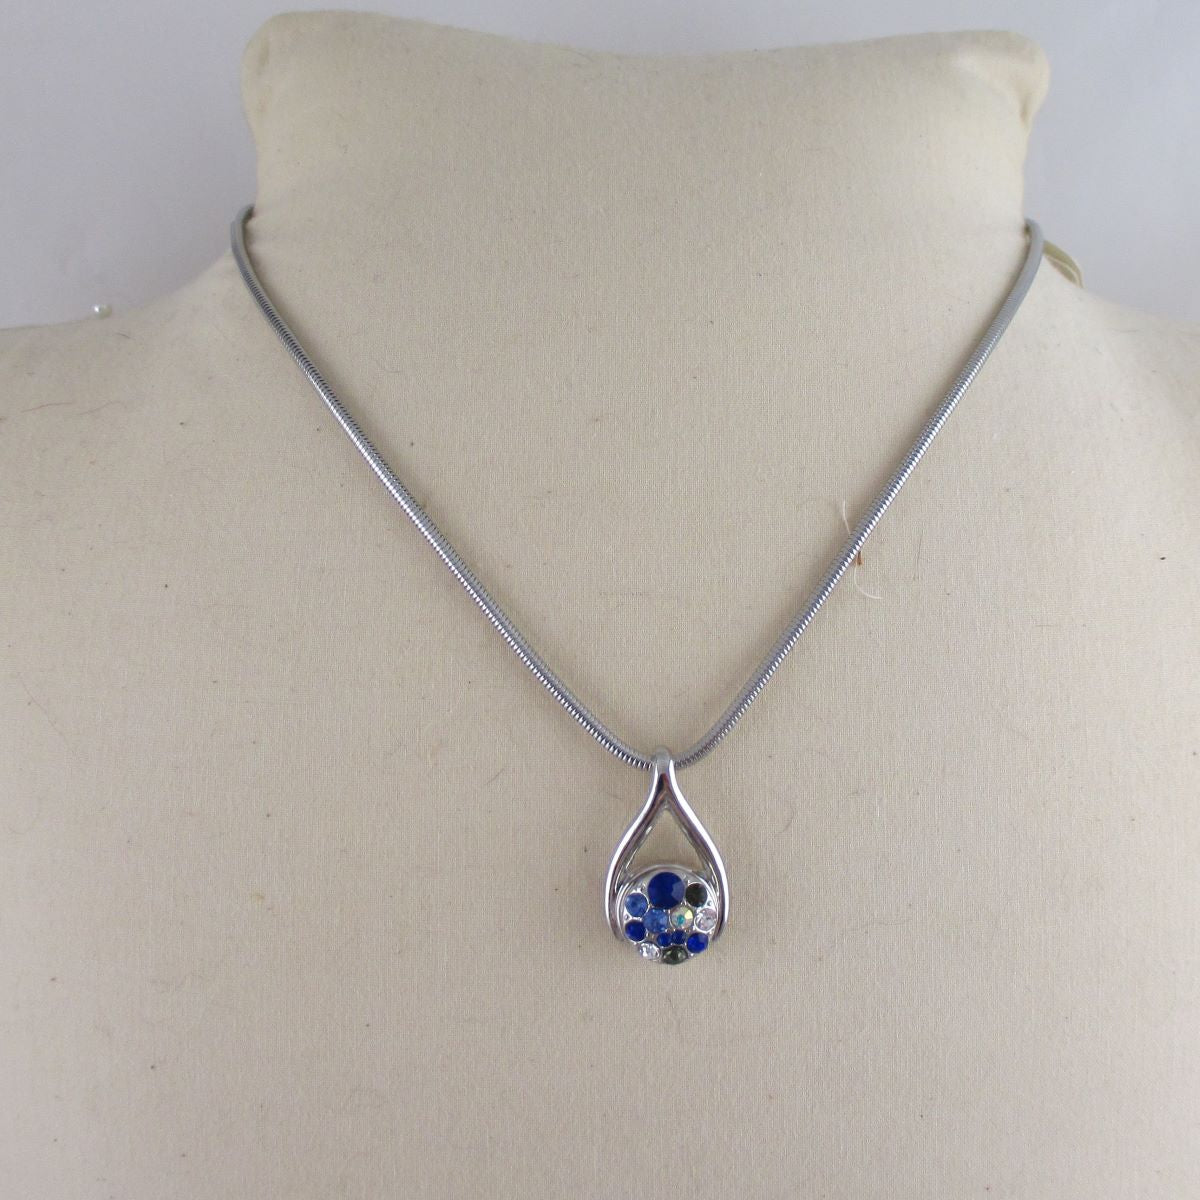 Shades of Blue Crystal Pendant Necklace - VP's Jewelry